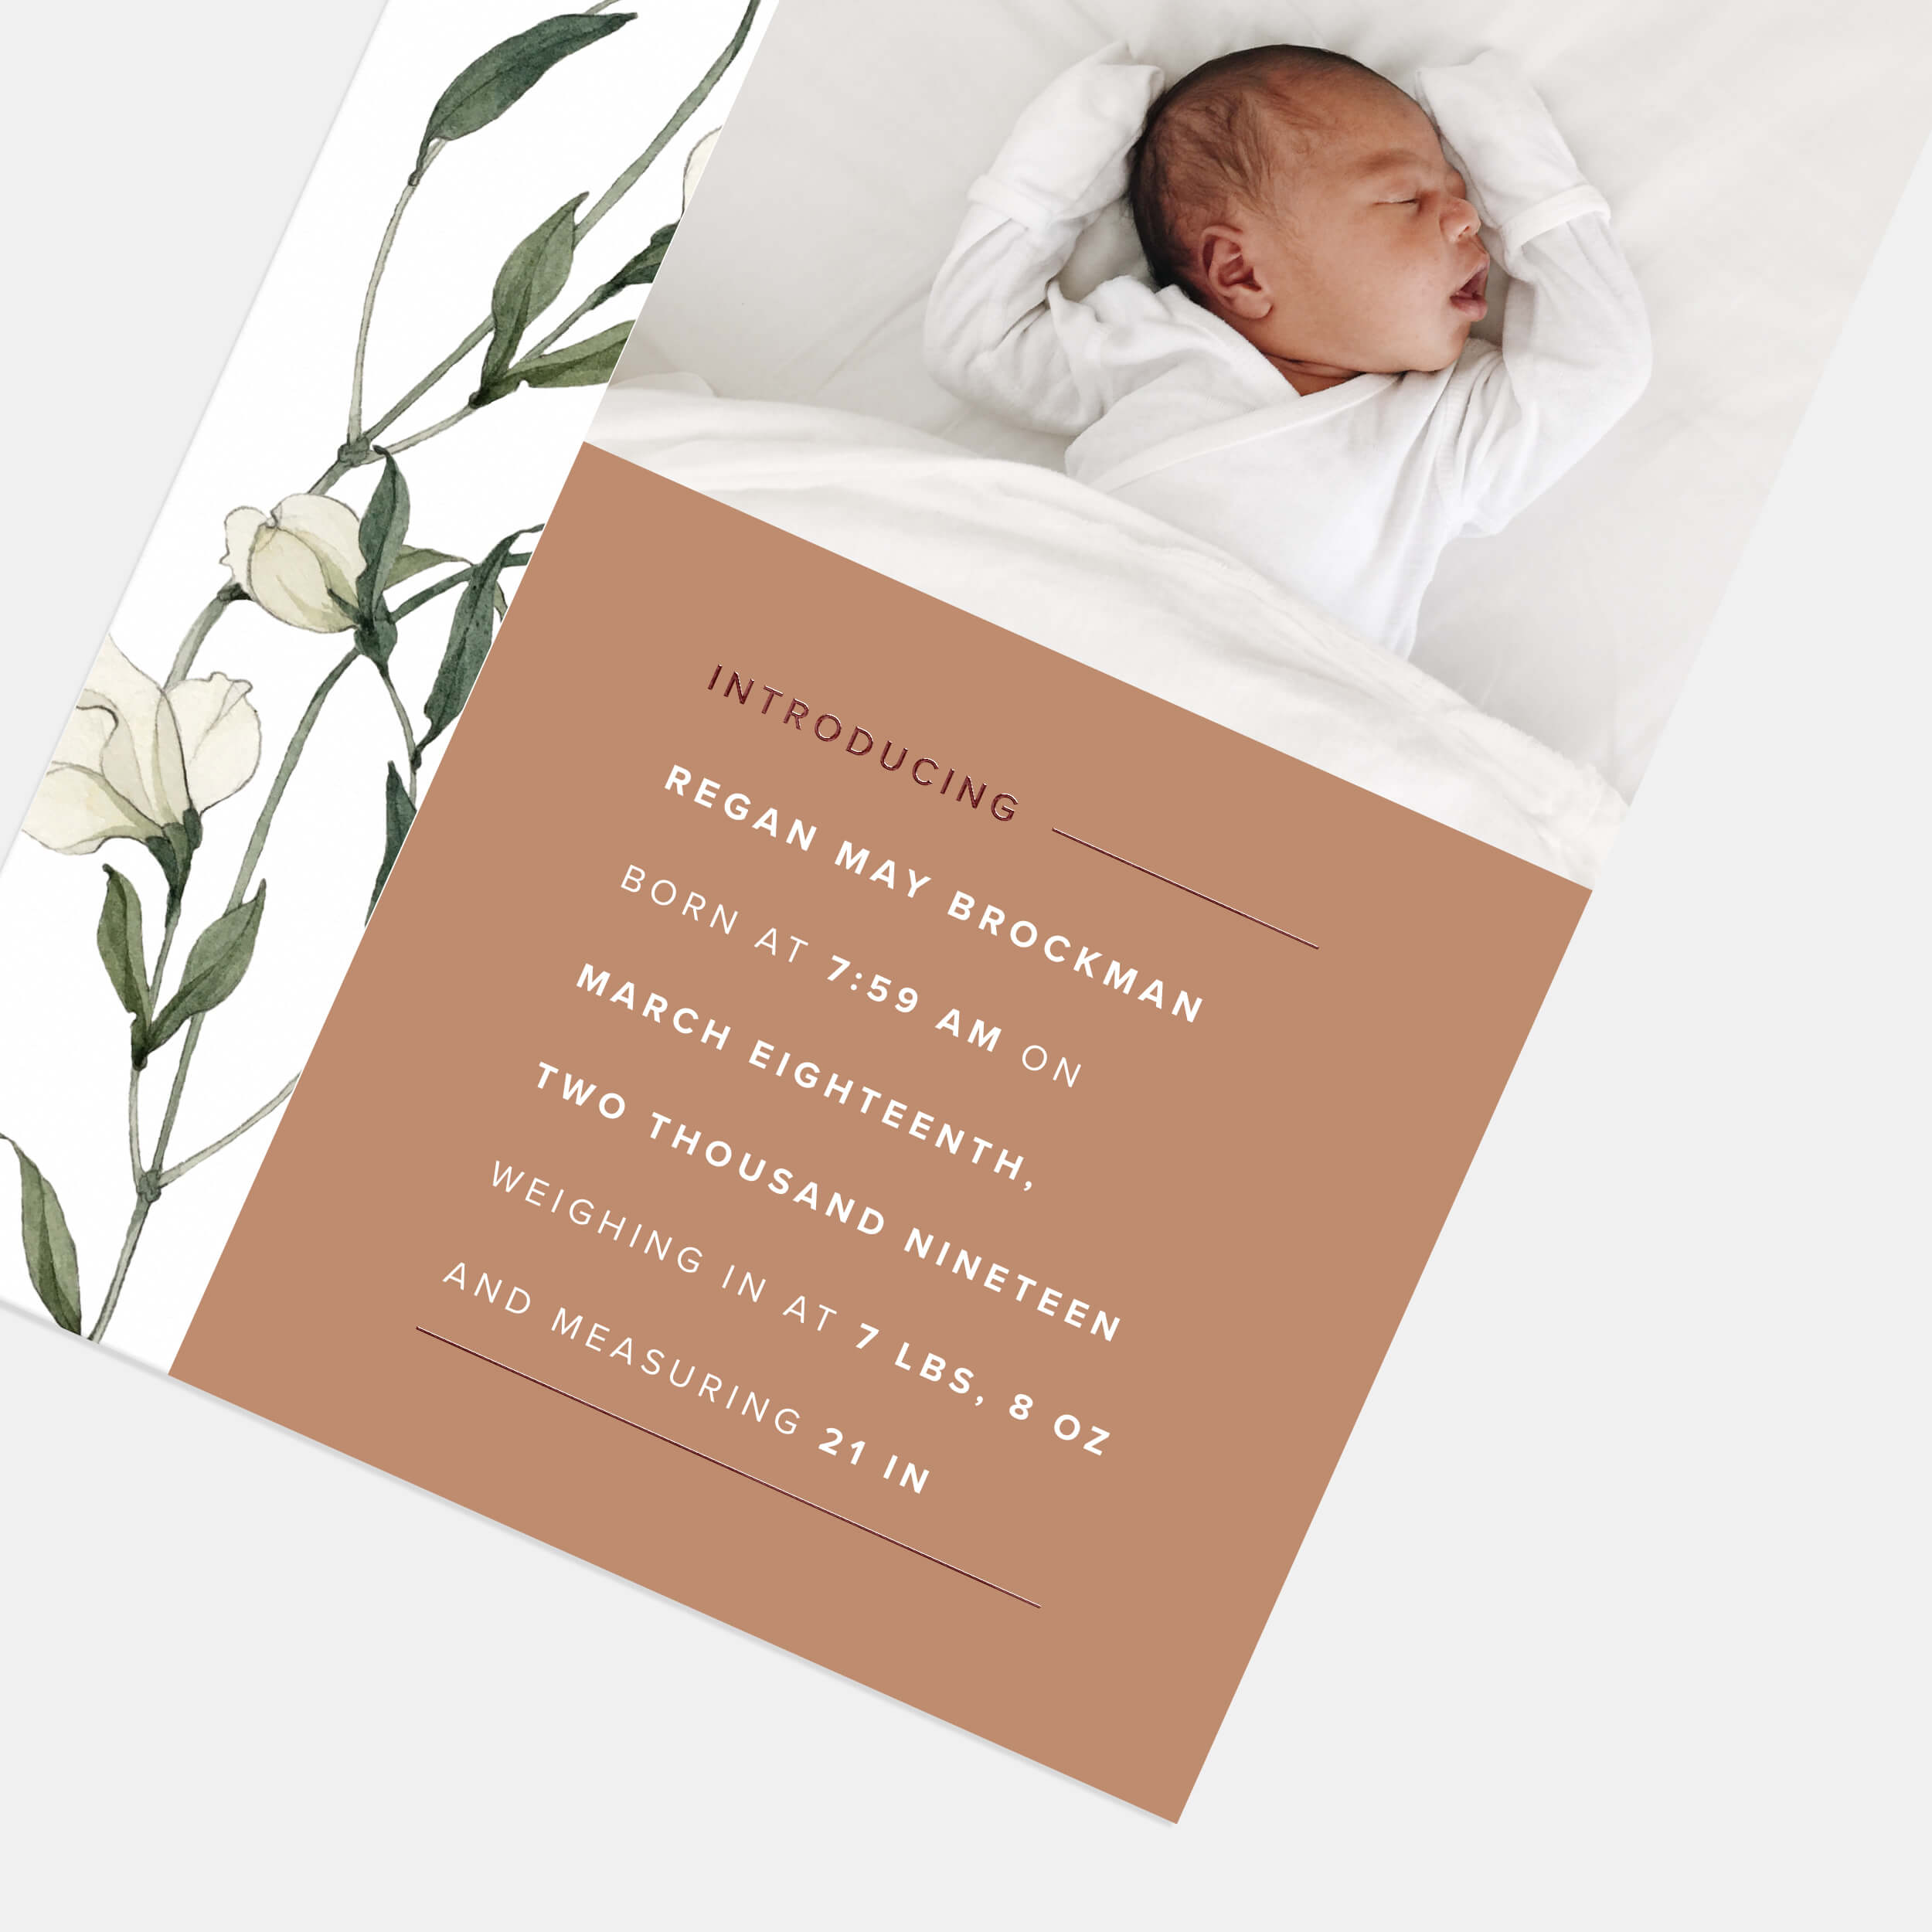 Modern Floral Baby Announcement